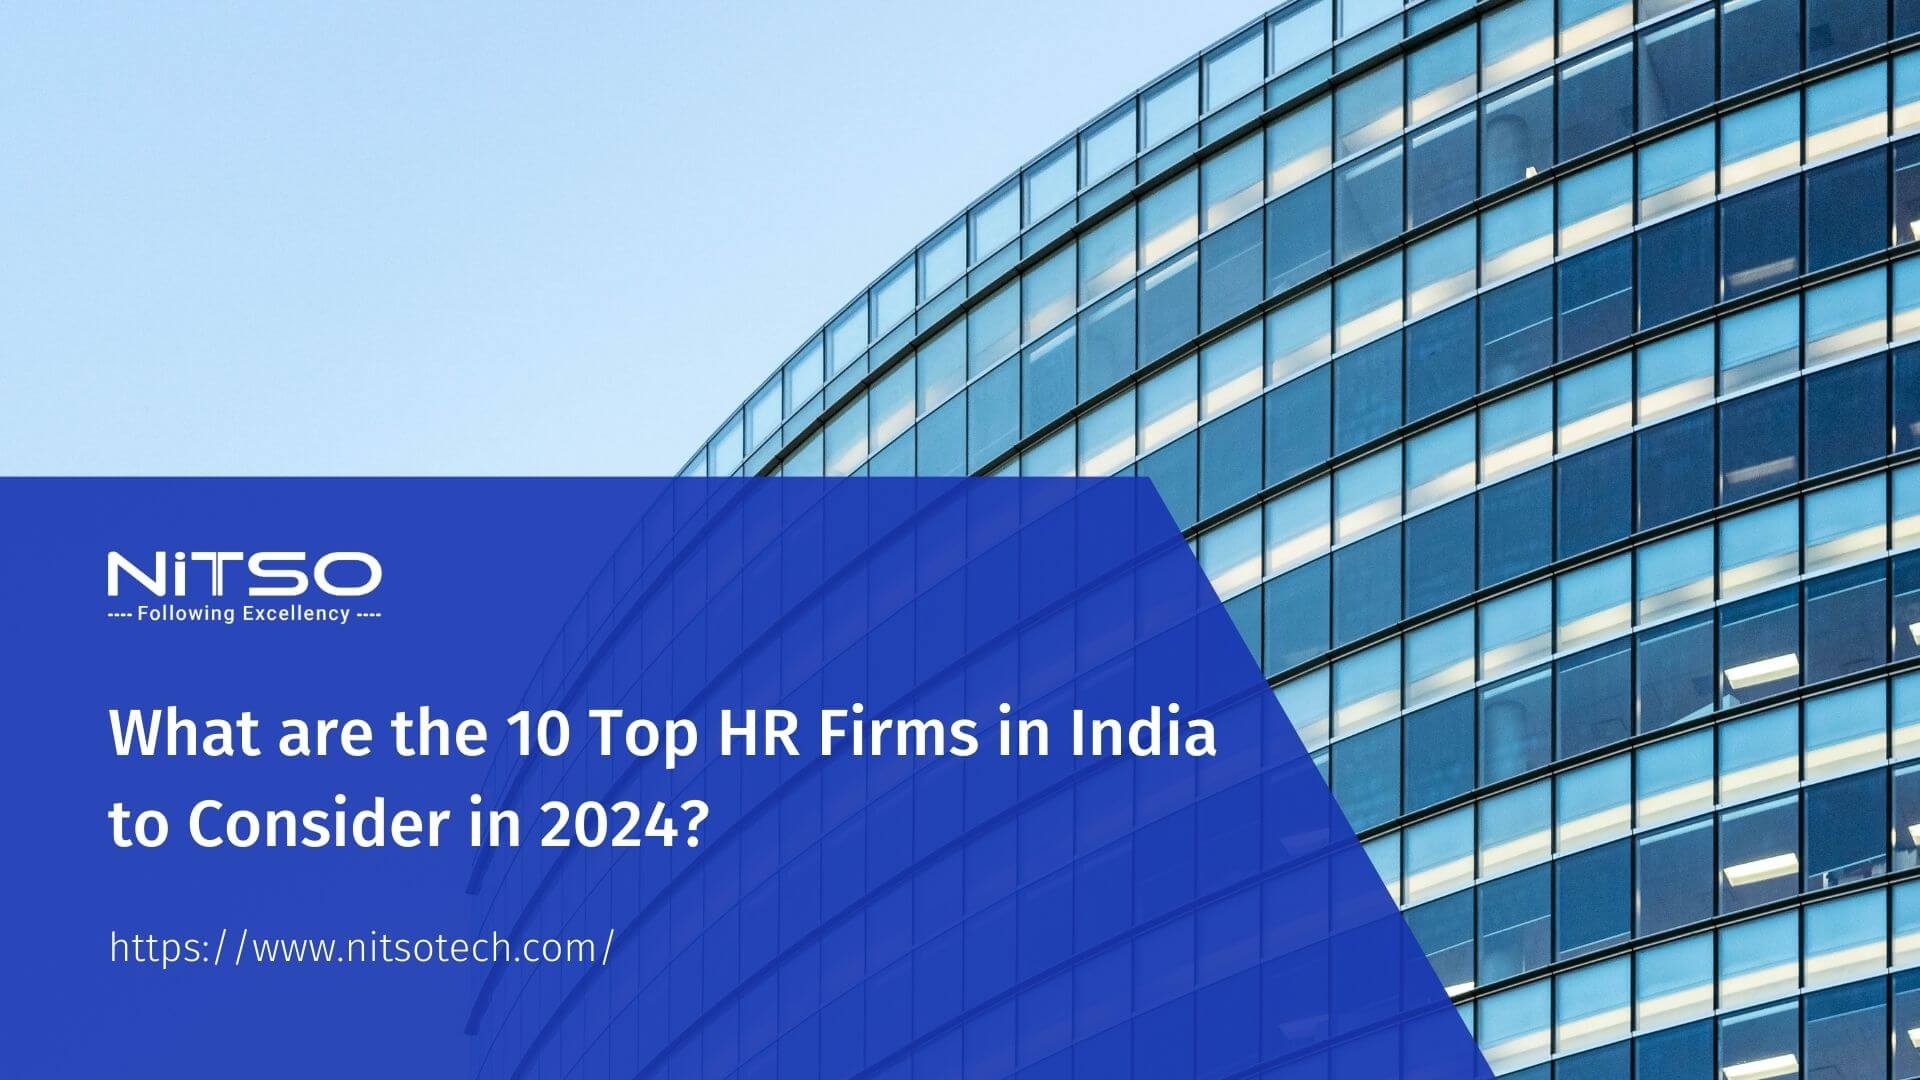 Seeking the Best HR Firms in India? Here are the Top 10!